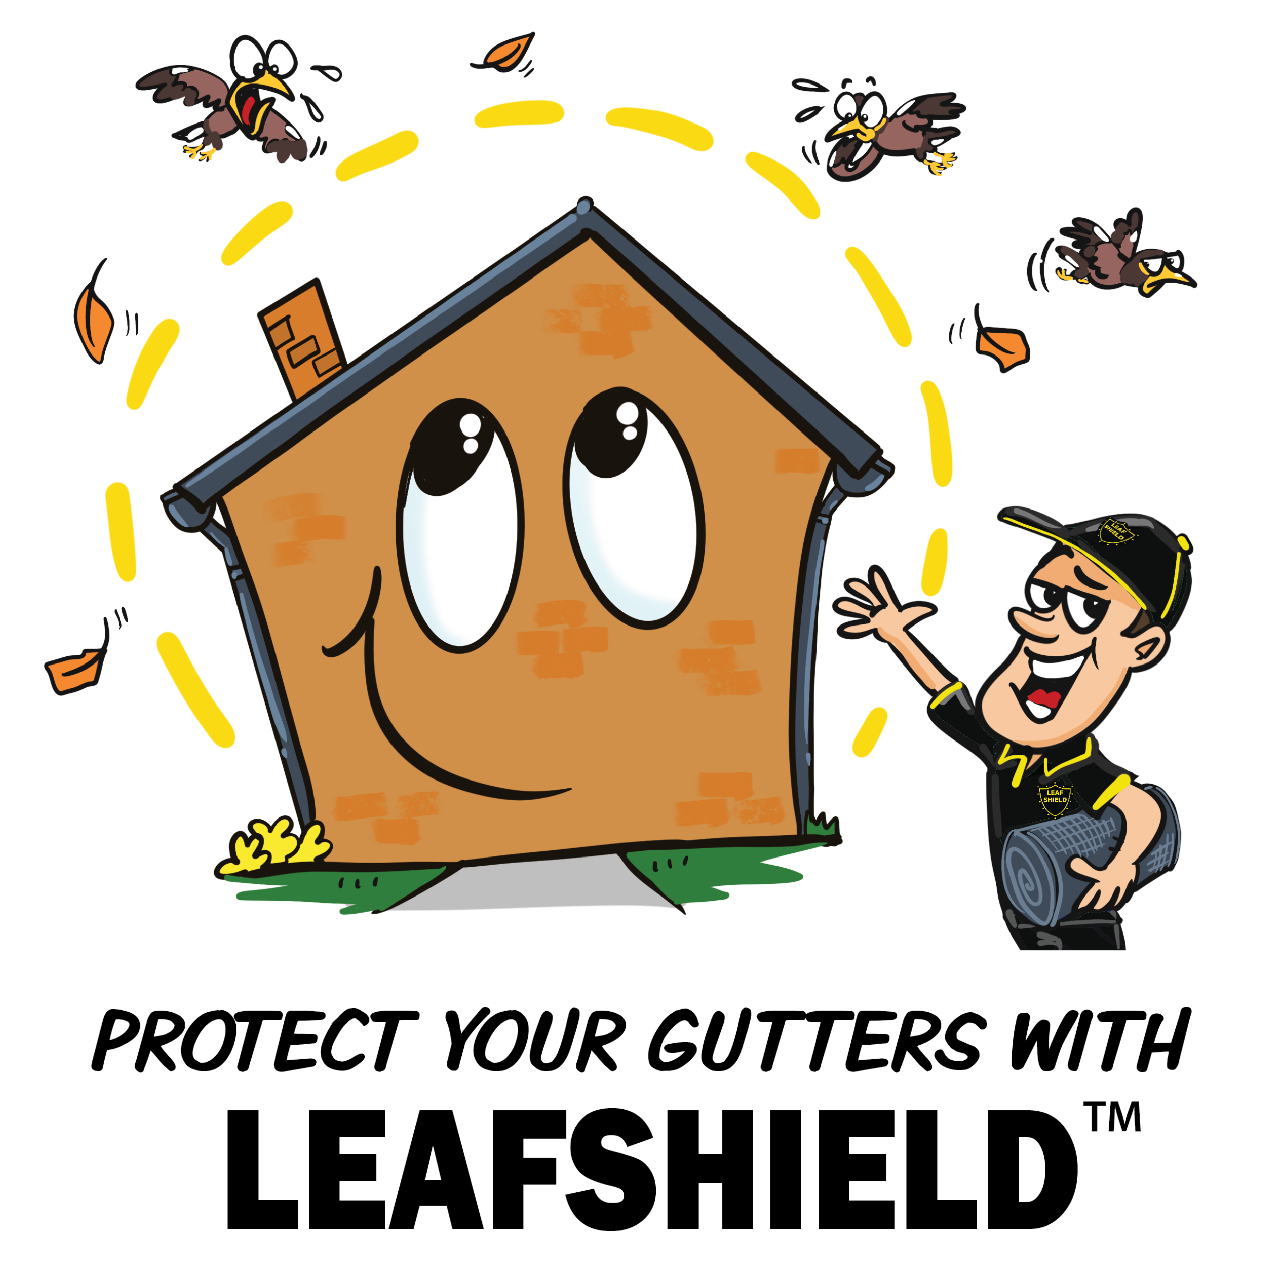 Protect your gutters with Leafshield™